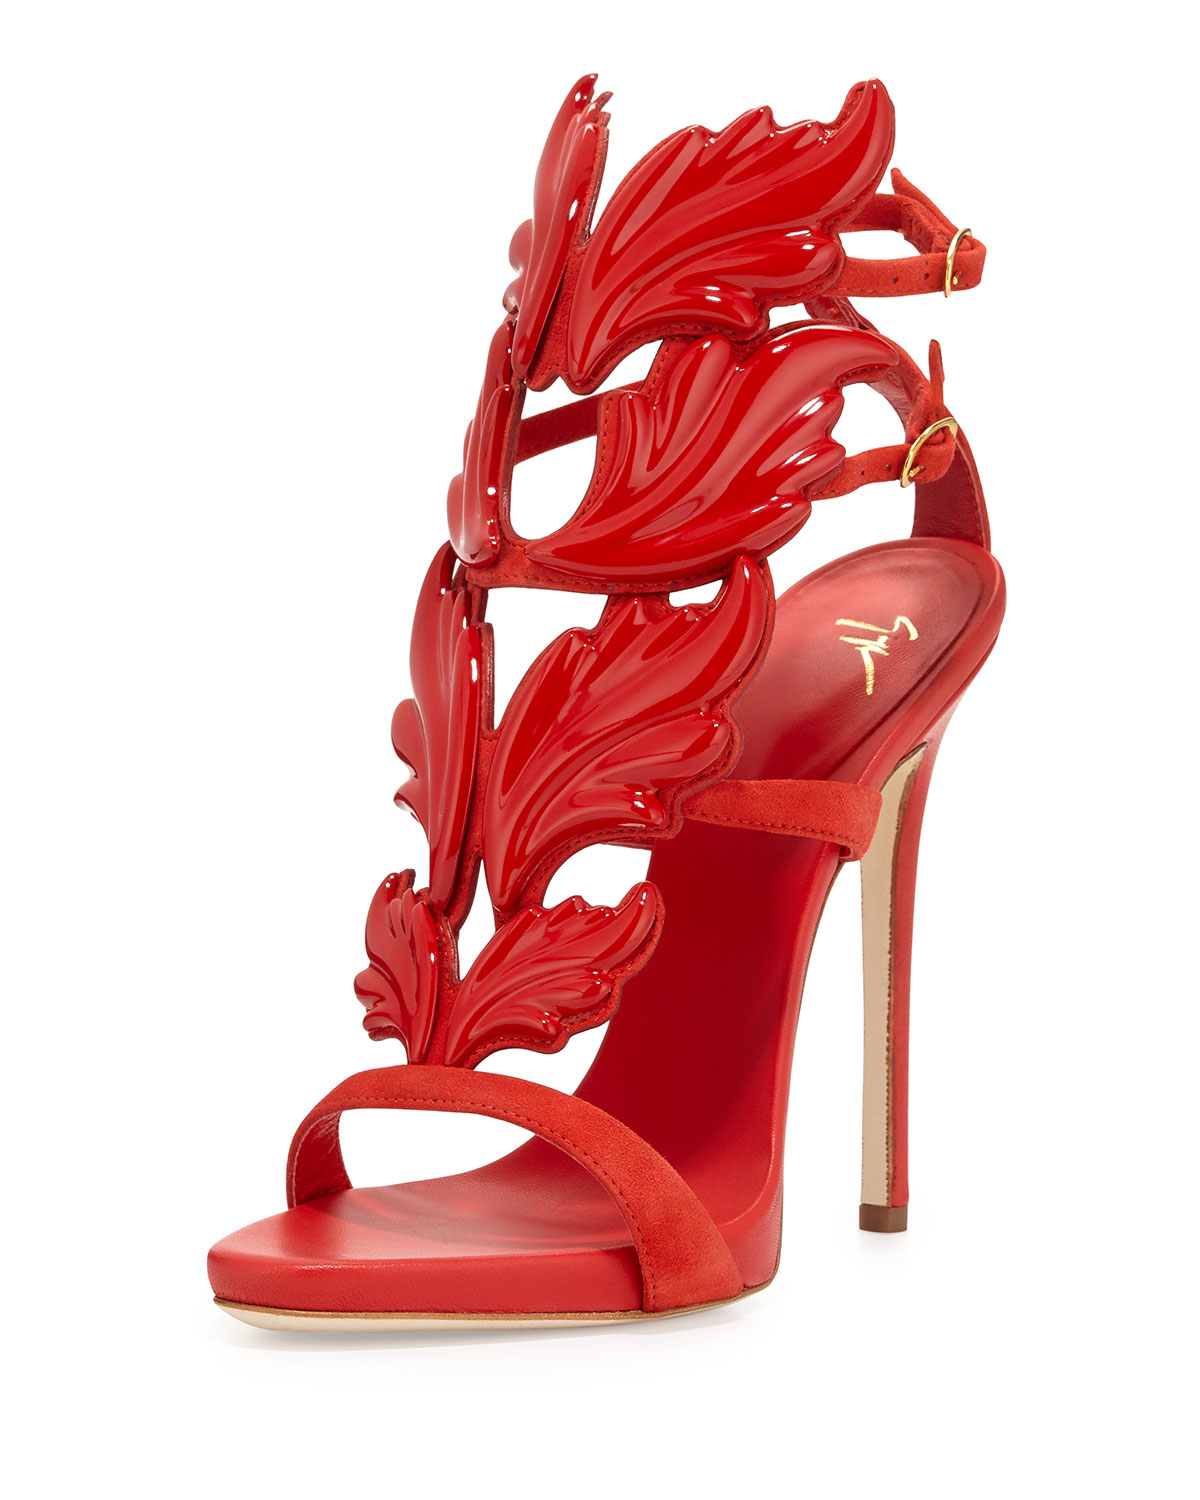 Lyst - Giuseppe Zanotti Flame Suede High-heel Sandal in Red